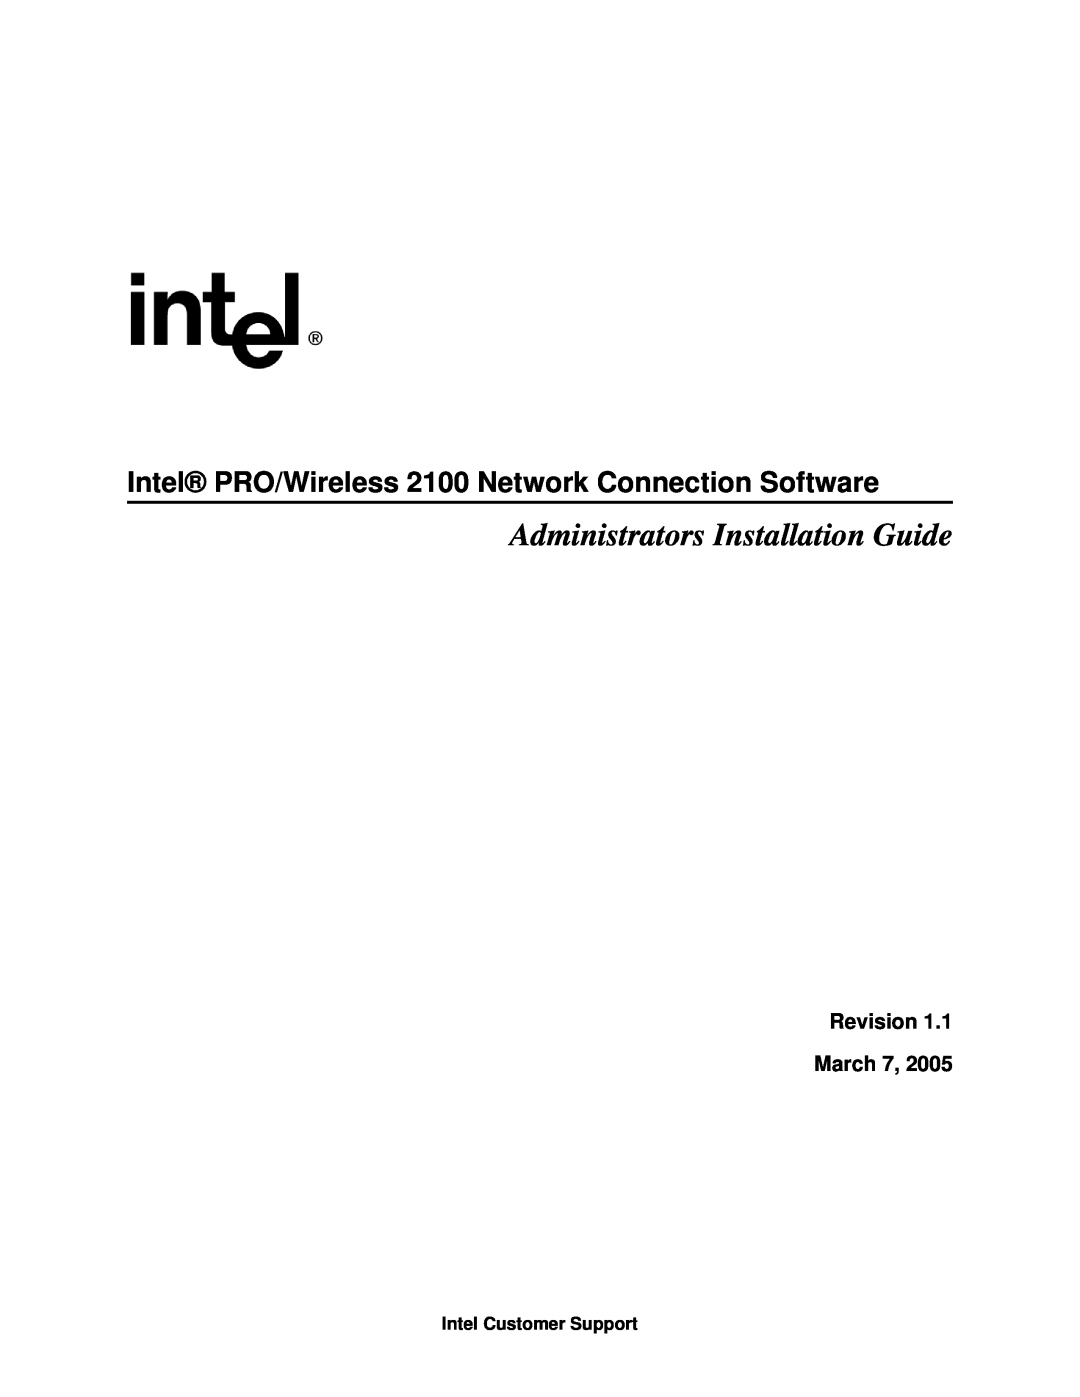 Intel Revision 1.1 manual Revision March, Administrators Installation Guide, Intel Customer Support 